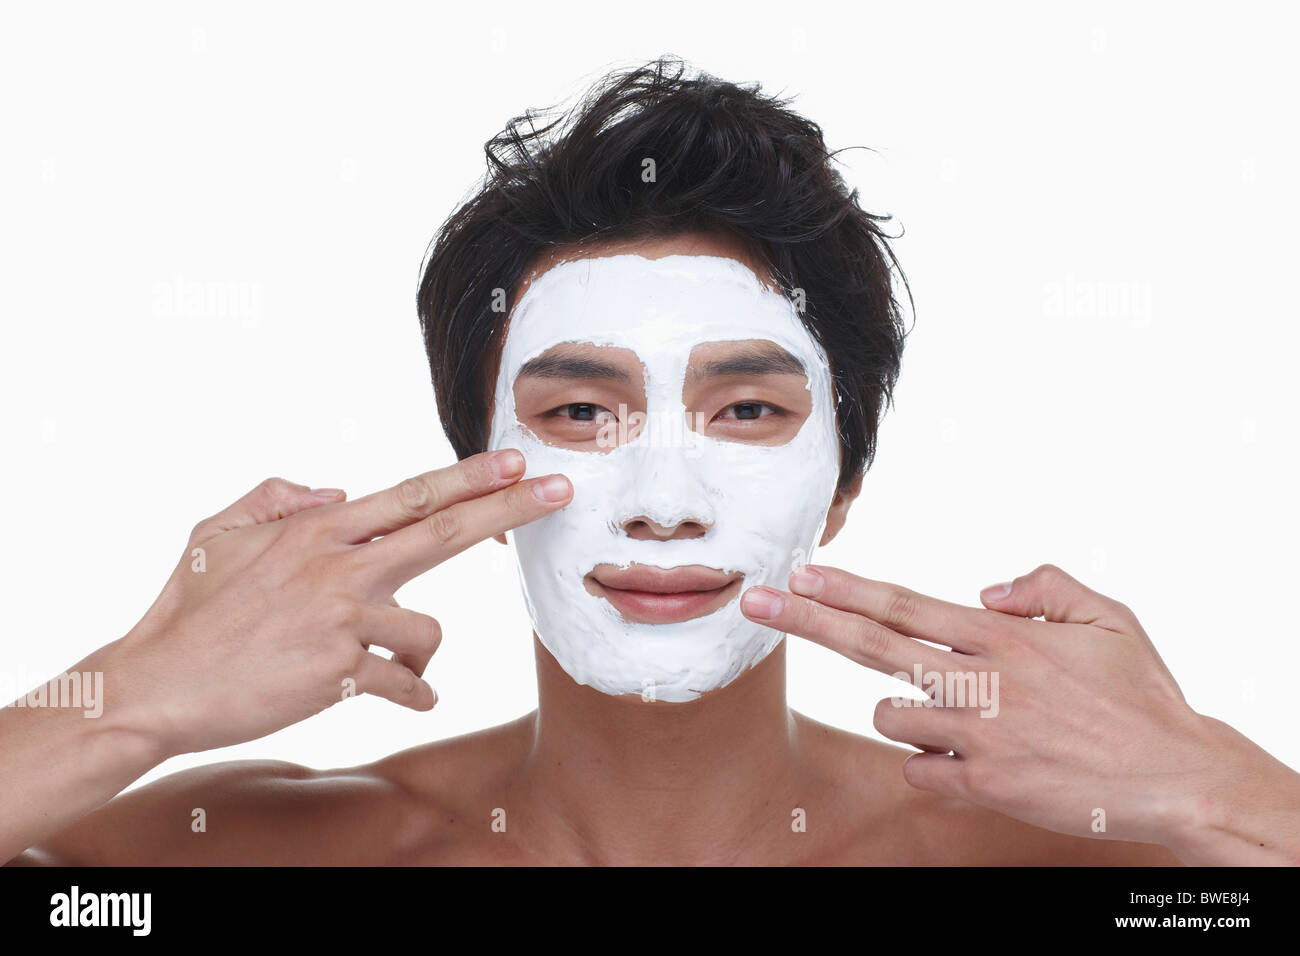 guy is doing a face pack Stock Photo